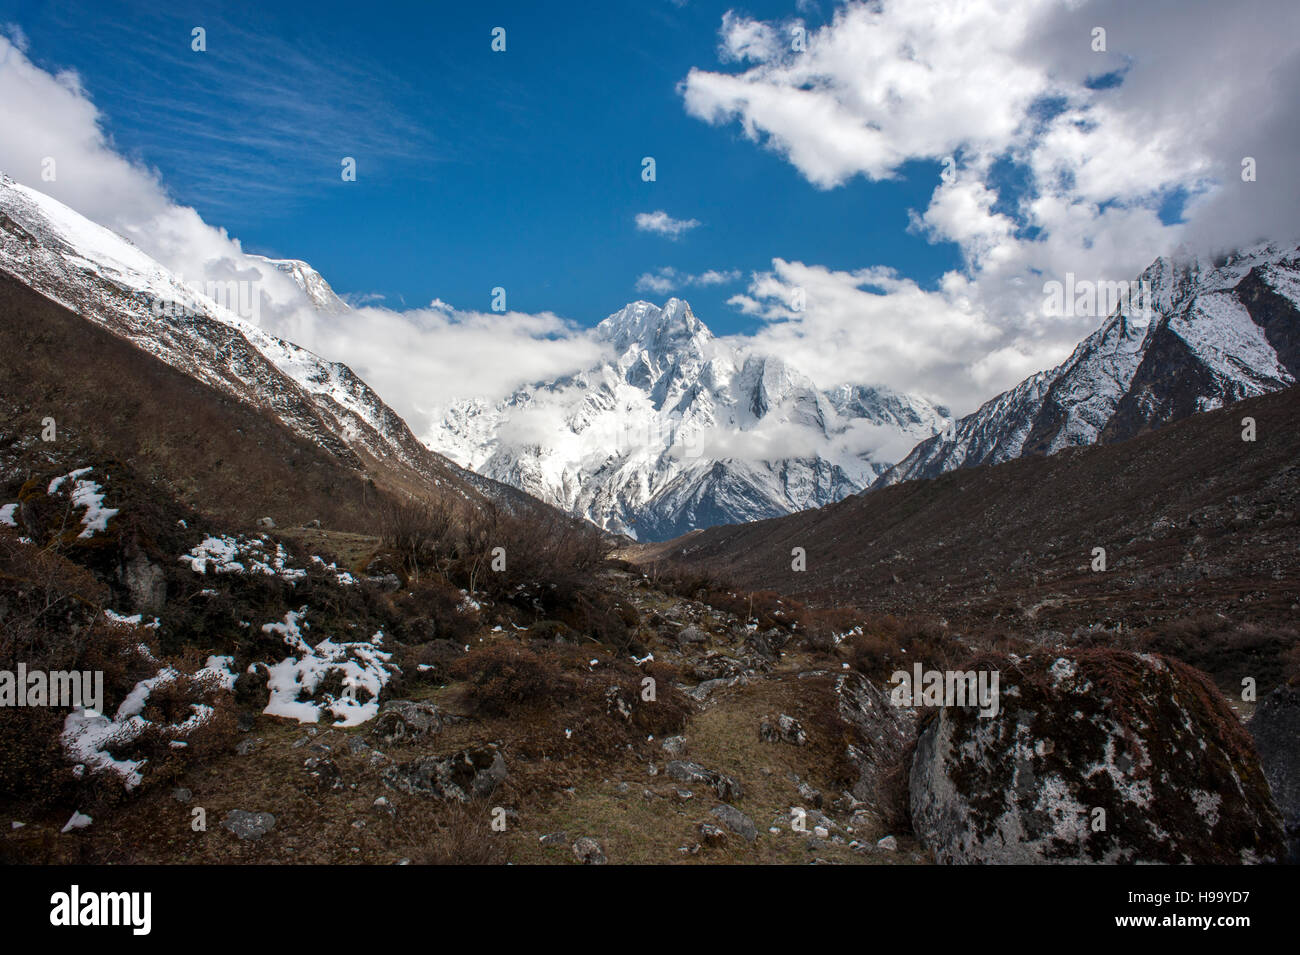 View of the mountains near the village of Bimthang on the Manaslu Circuit, 12 days from the trailhead at Arughat Bazaar. The 16-day Manaslu Circuit is Stock Photo